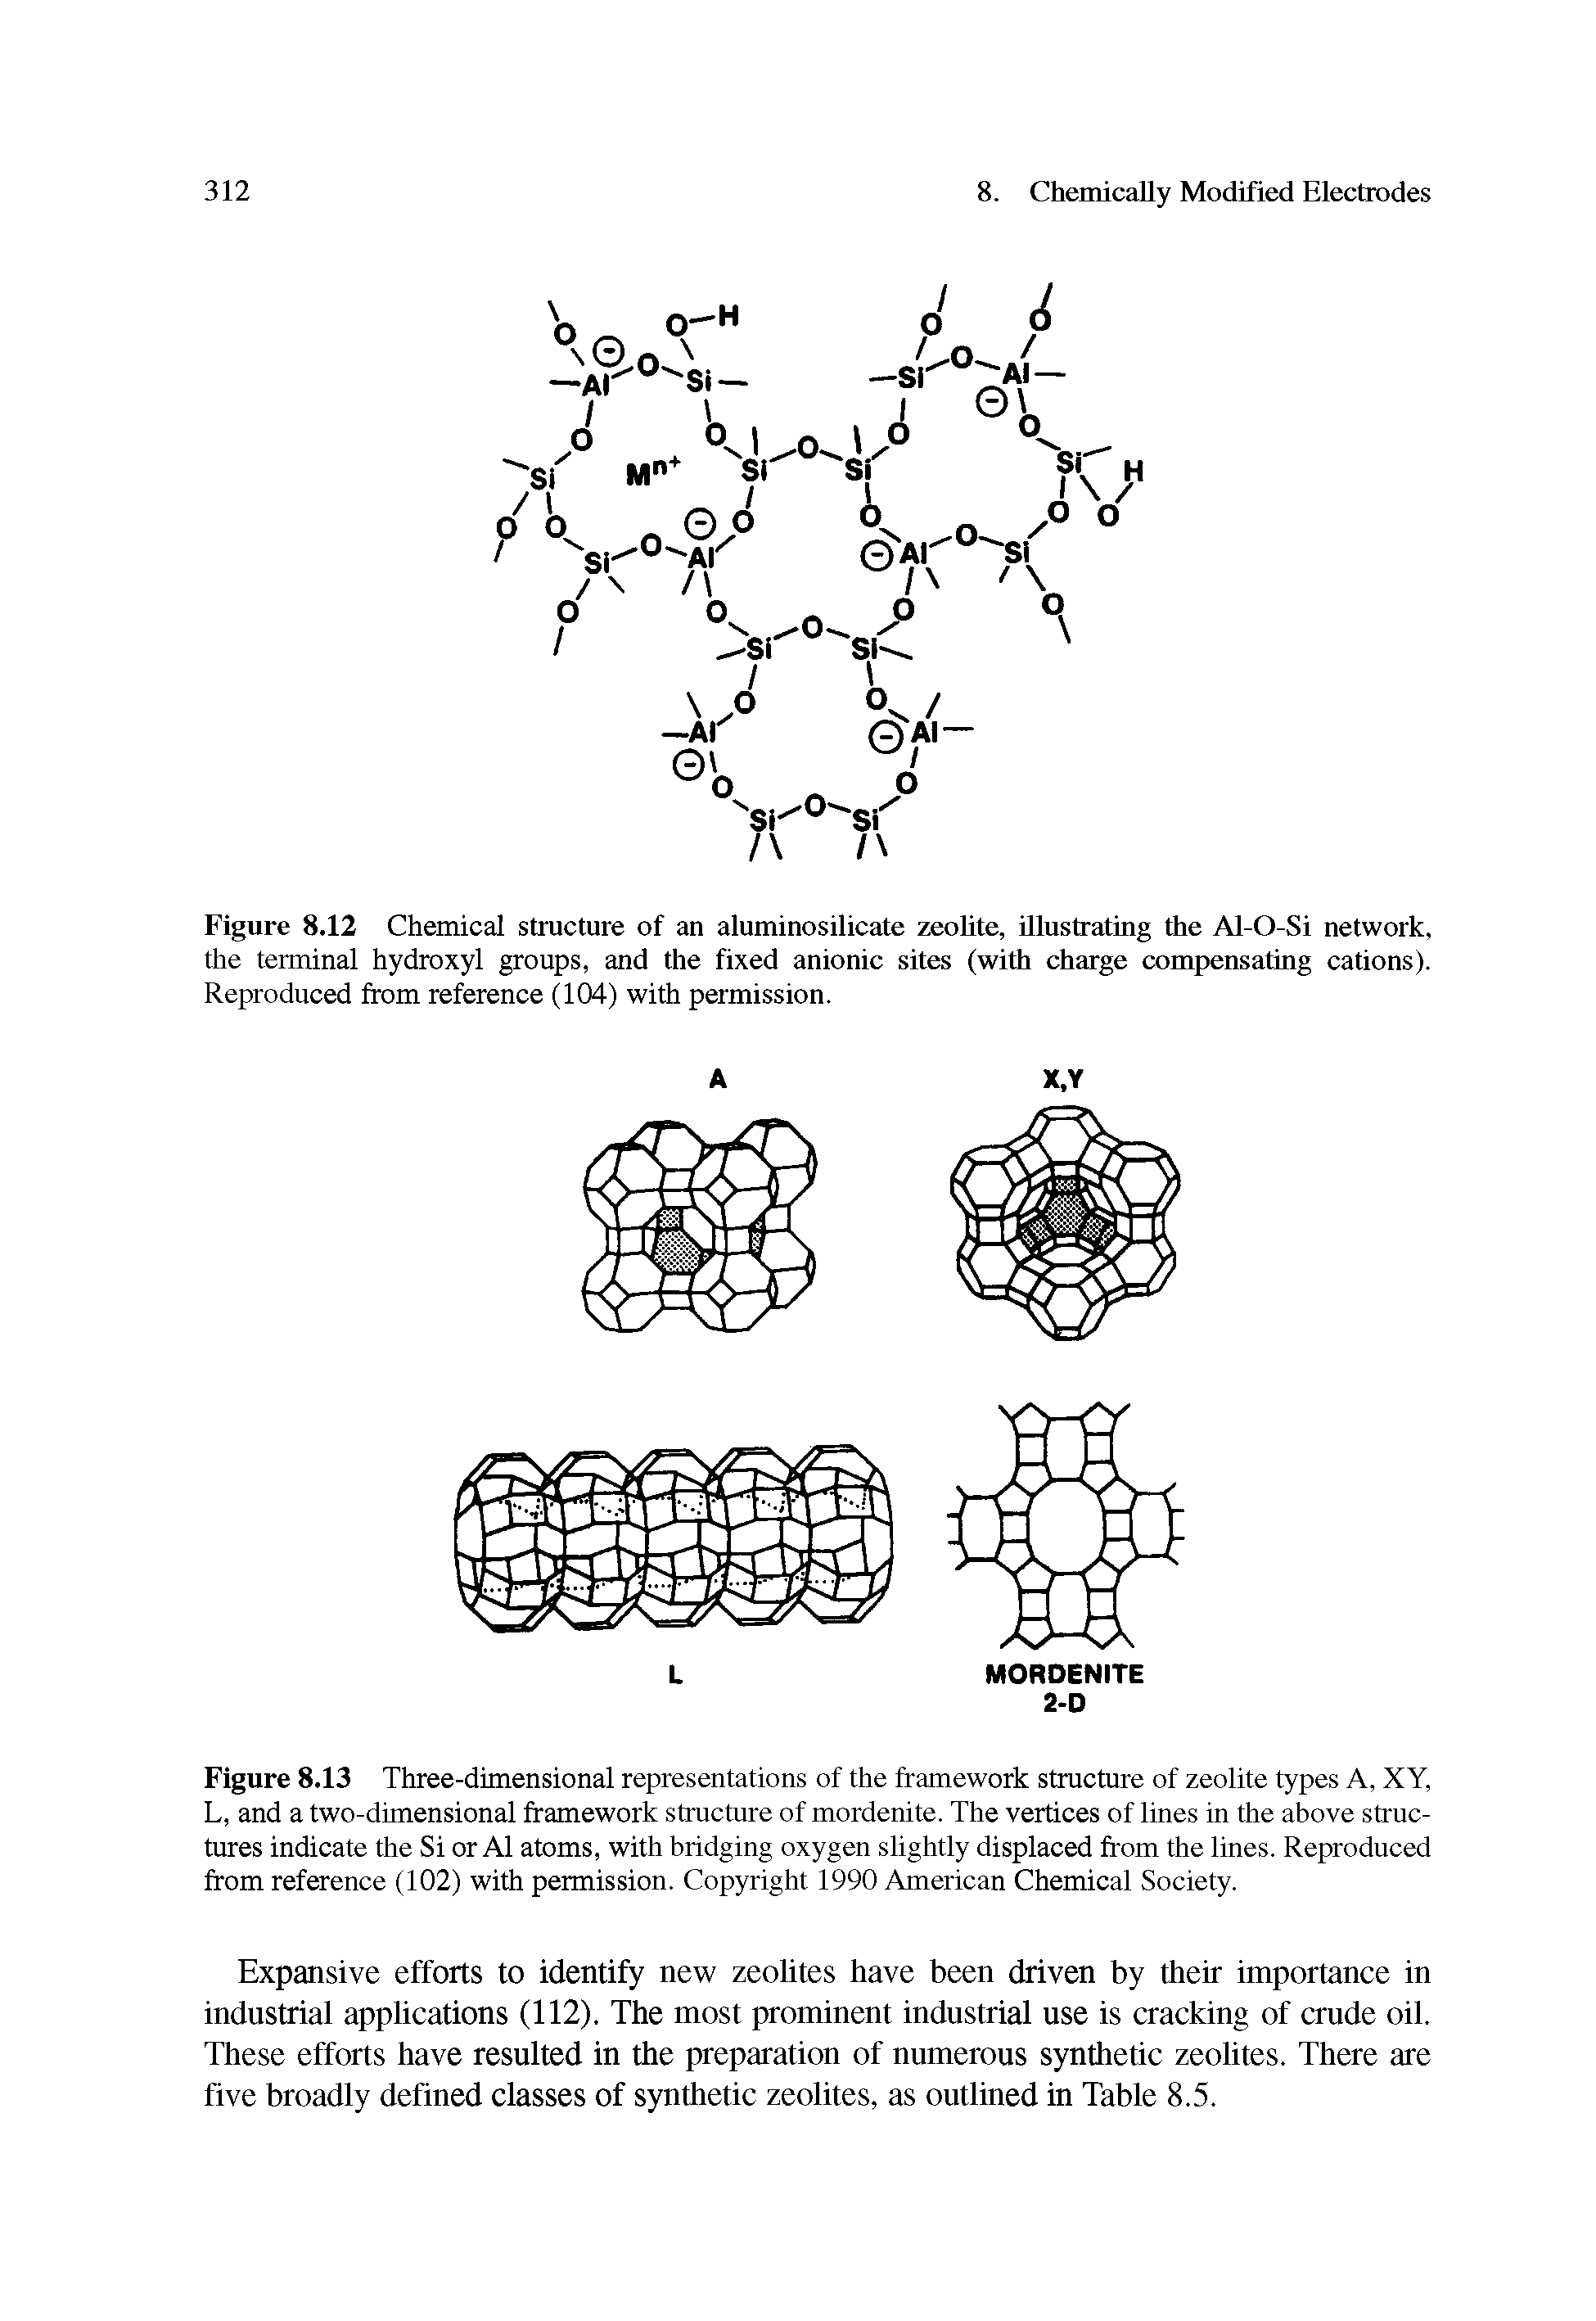 Figure 8.13 Three-dimensional representations of the framework structure of zeolite types A, XY, L, and a two-dimensional framework structure of mordenite. The vertices of lines in the above structures indicate the Si or Al atoms, with bridging oxygen slightly displaced from the lines. Reproduced from reference (102) with permission. Copyright 1990 American Chemical Society.